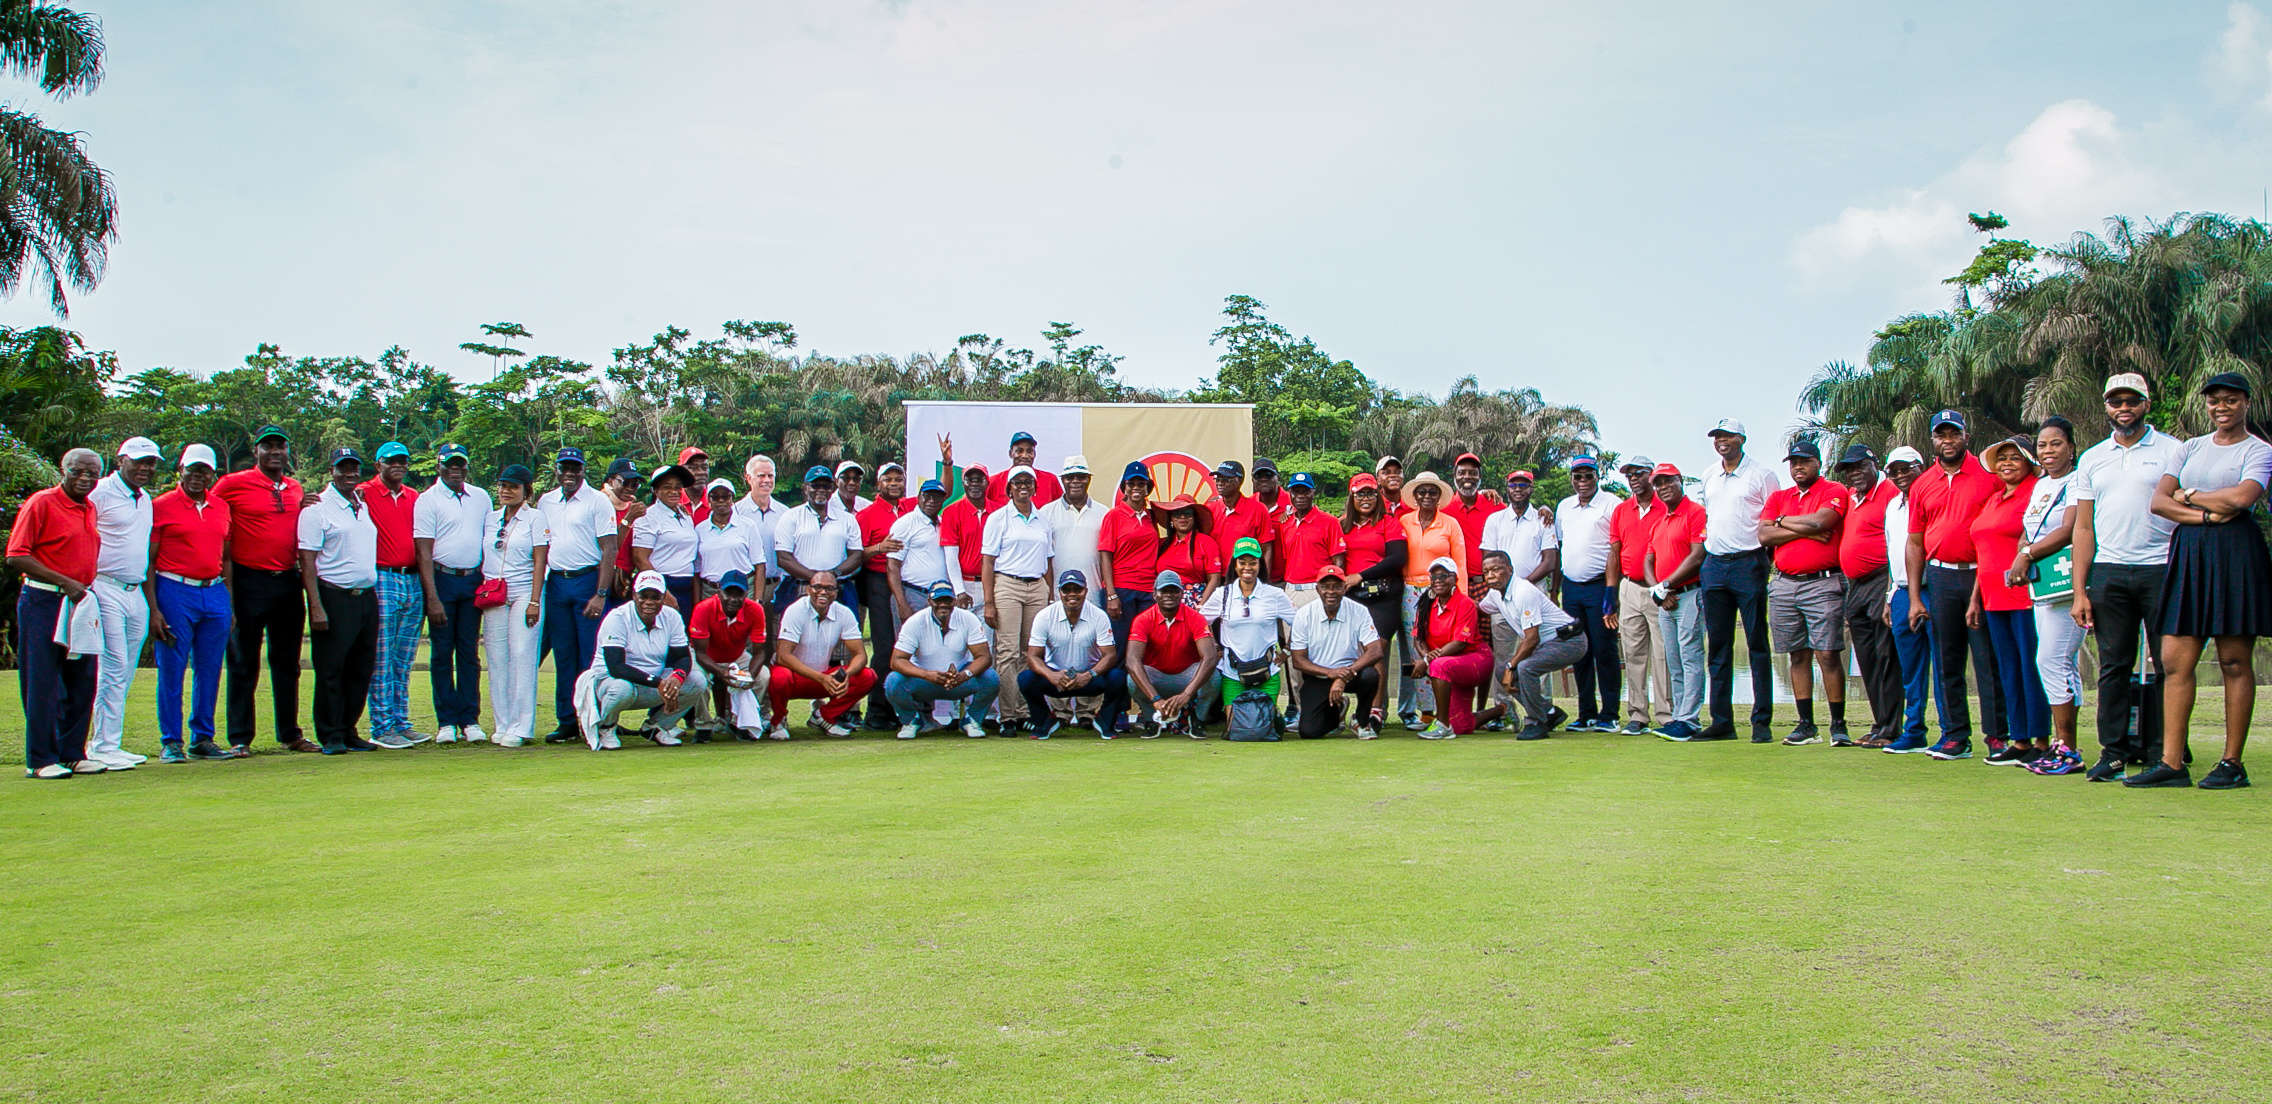  Photo: Shell’s golf tournament attracts serving, retired leaders